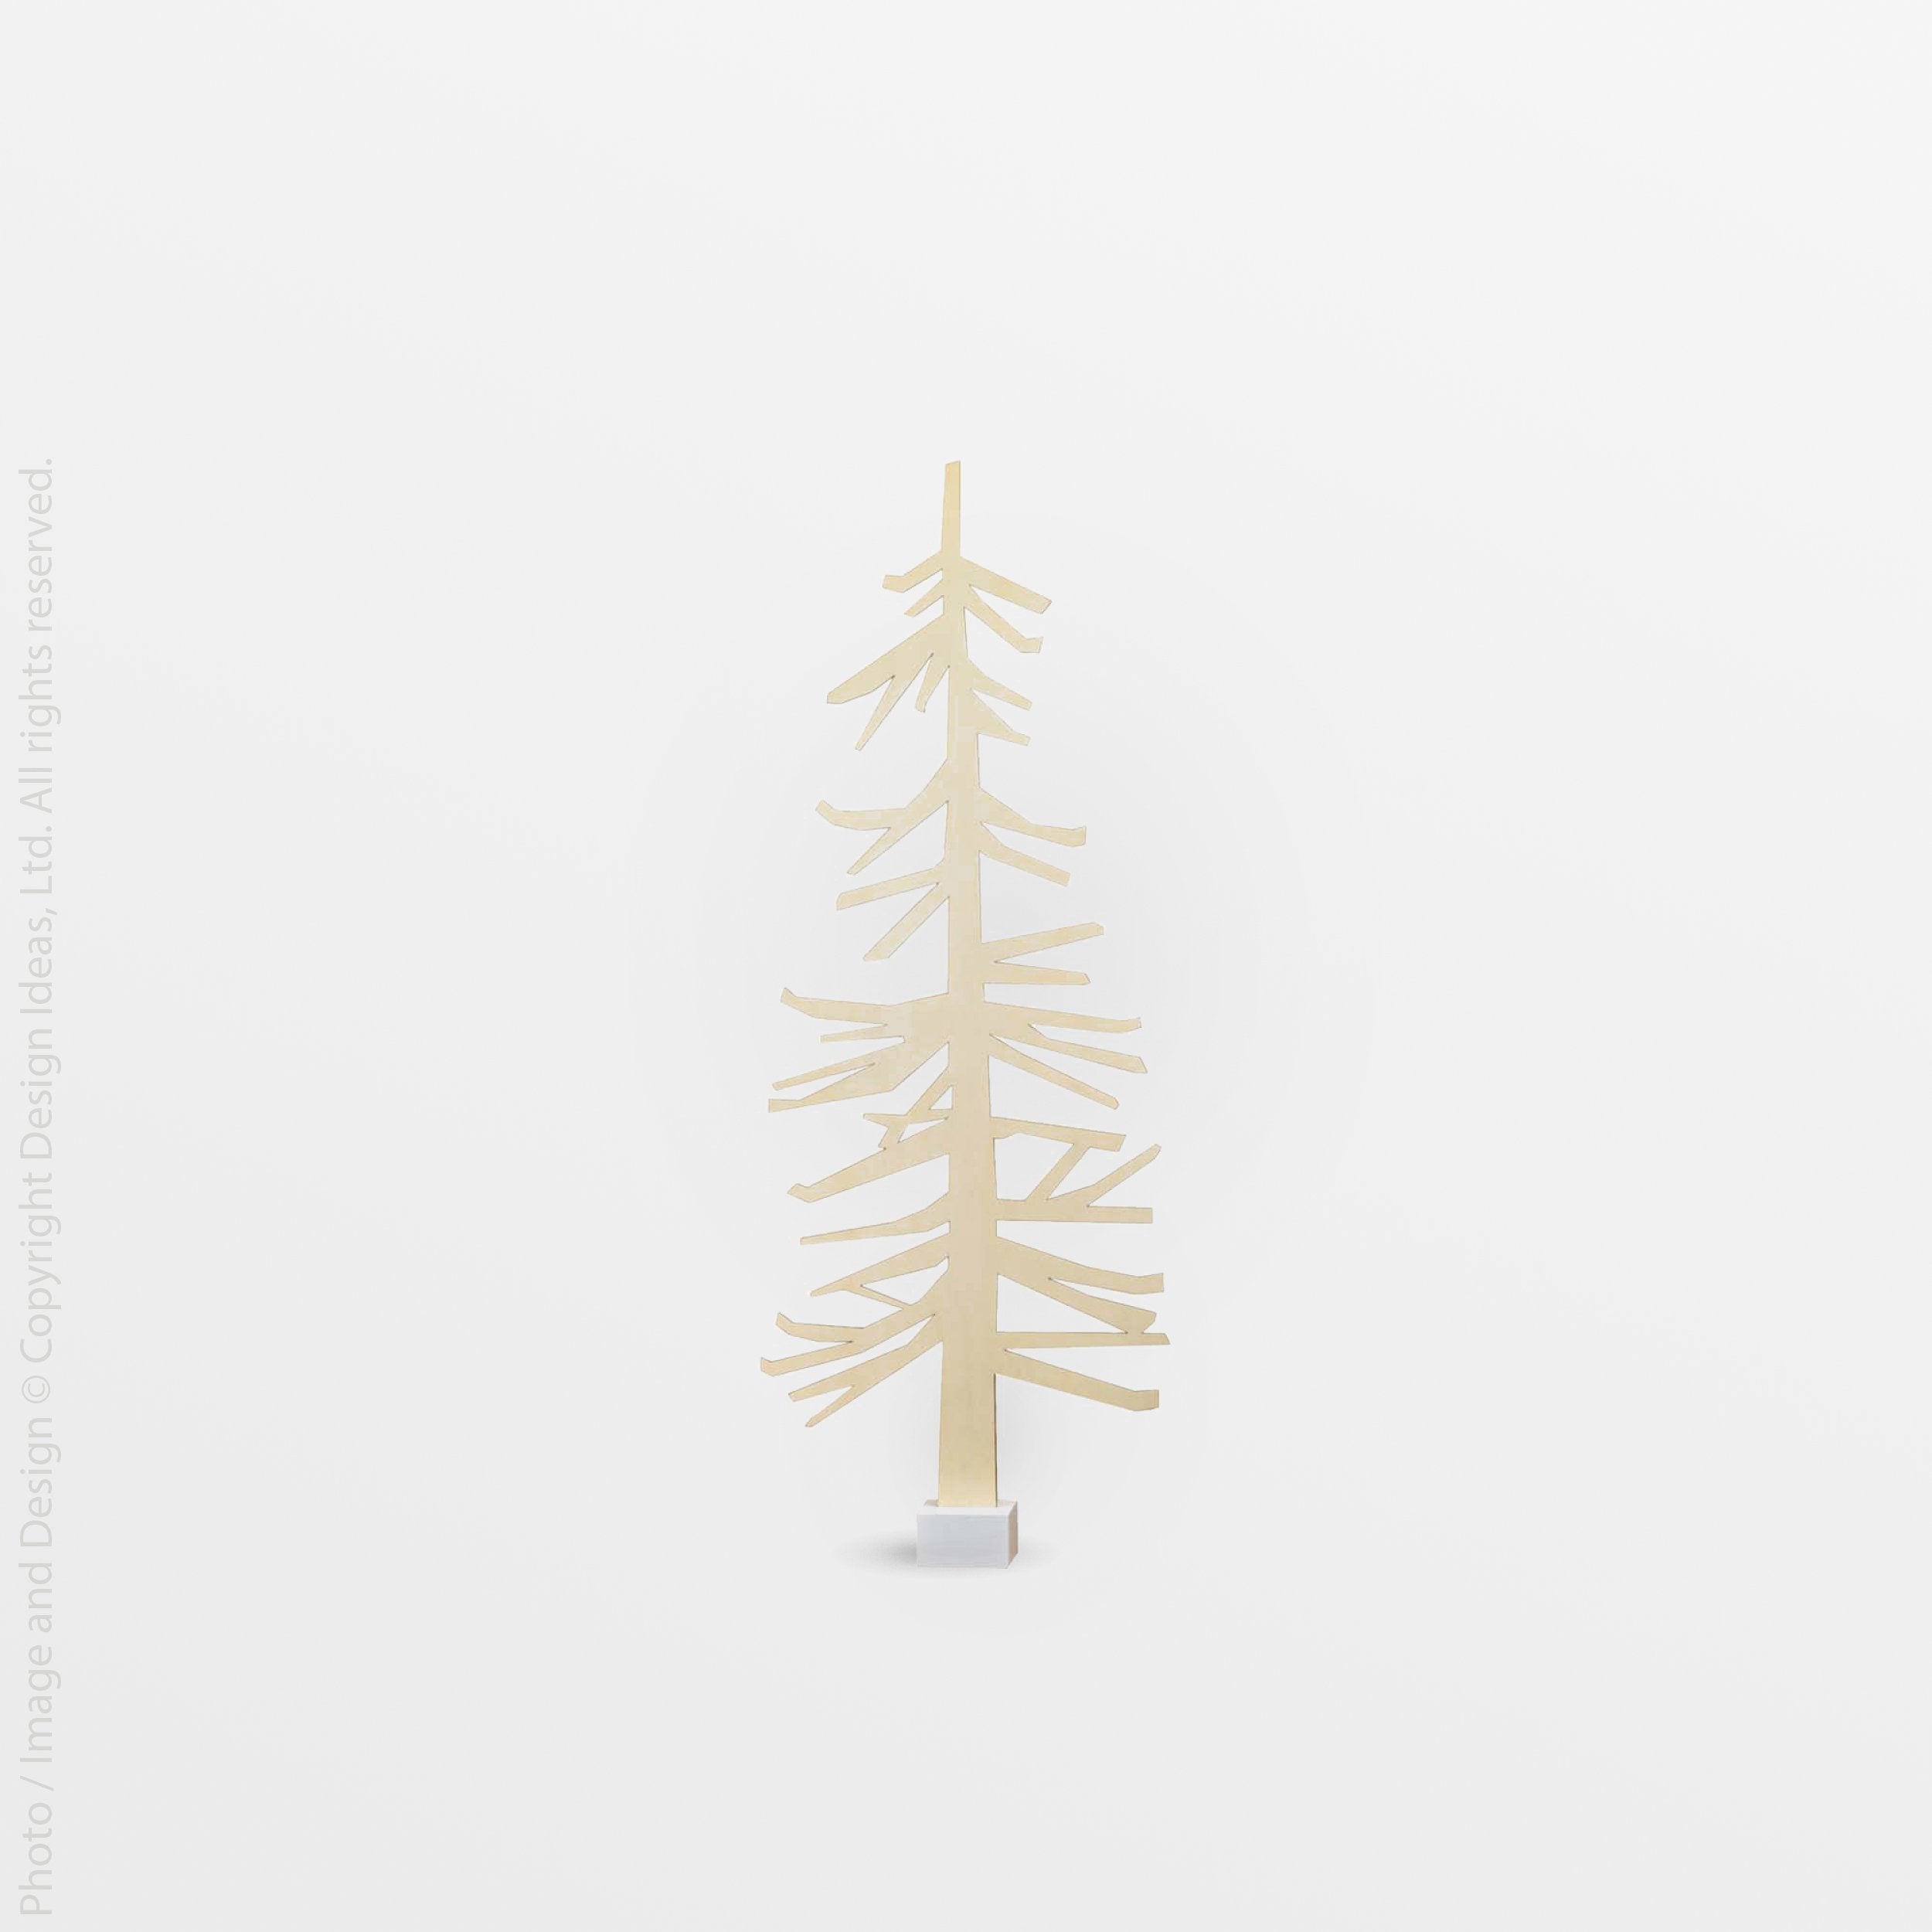 Nordic Wood Tree (Medium) - white color | Image 1 | From the Nordic Collection | Masterfully made with natural wood for long lasting use | Available in white color | texxture home